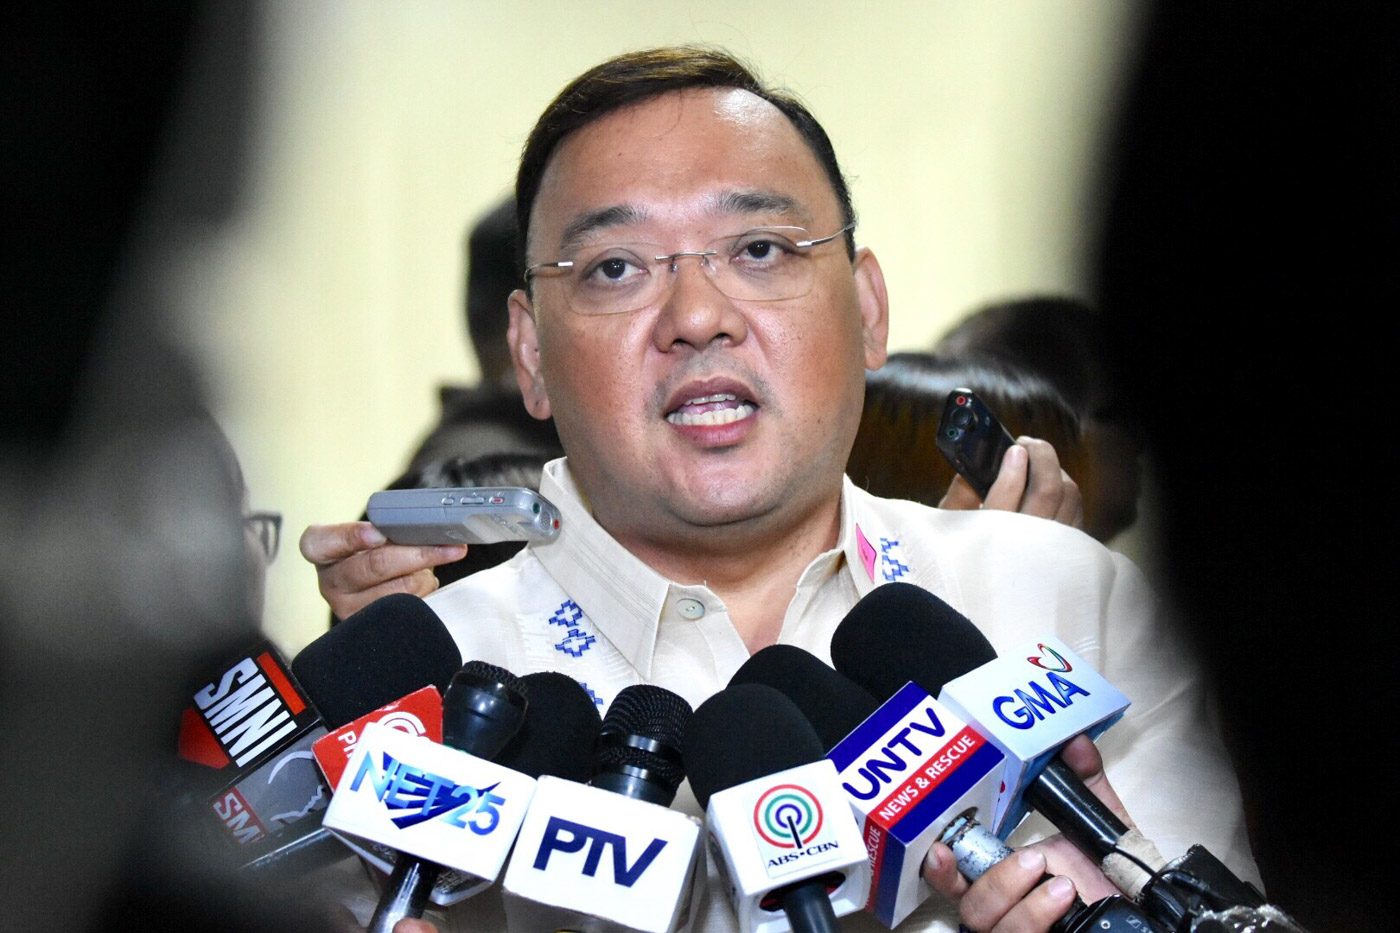 After days of indecision, Harry Roque forges on with Senate bid